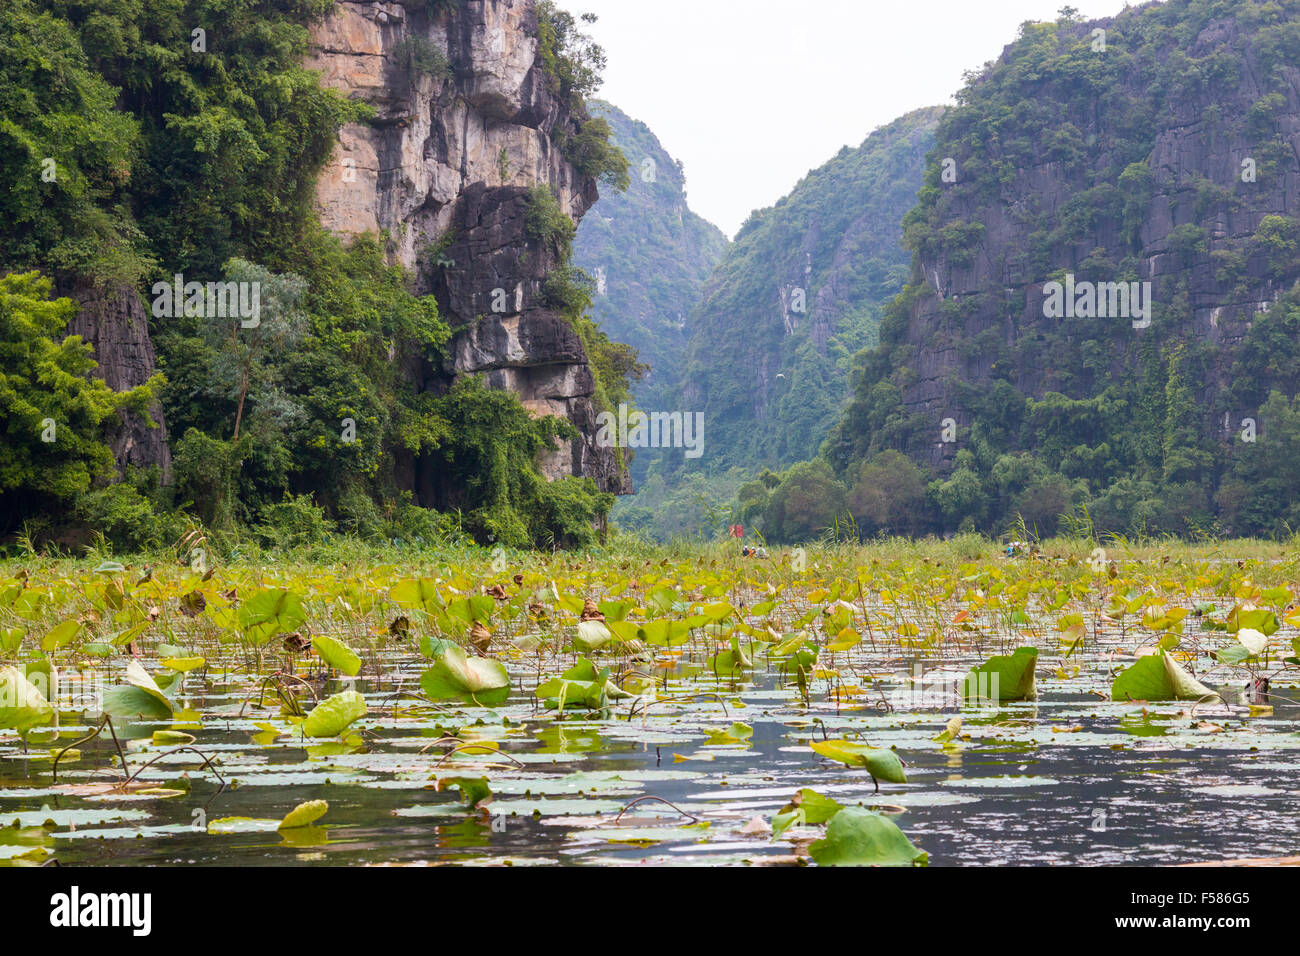 Tam Coc area of Ngo Dong River where tourists travel by boat to see caves and islands often called halong bay on land,Vietnam Stock Photo